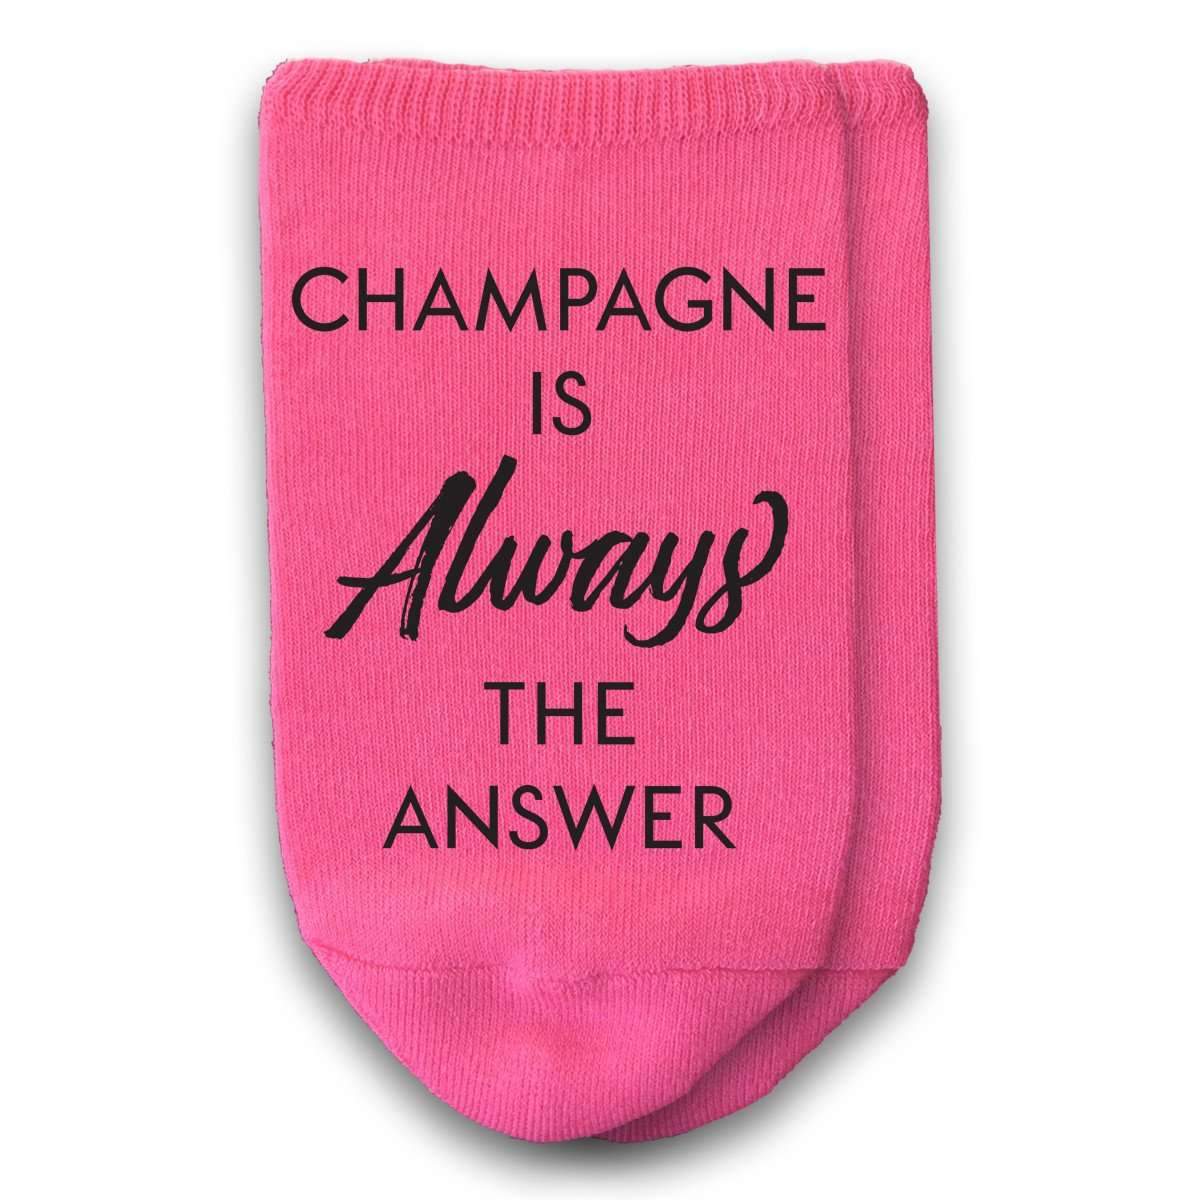 Champagne is always the answer printed on no show socks.